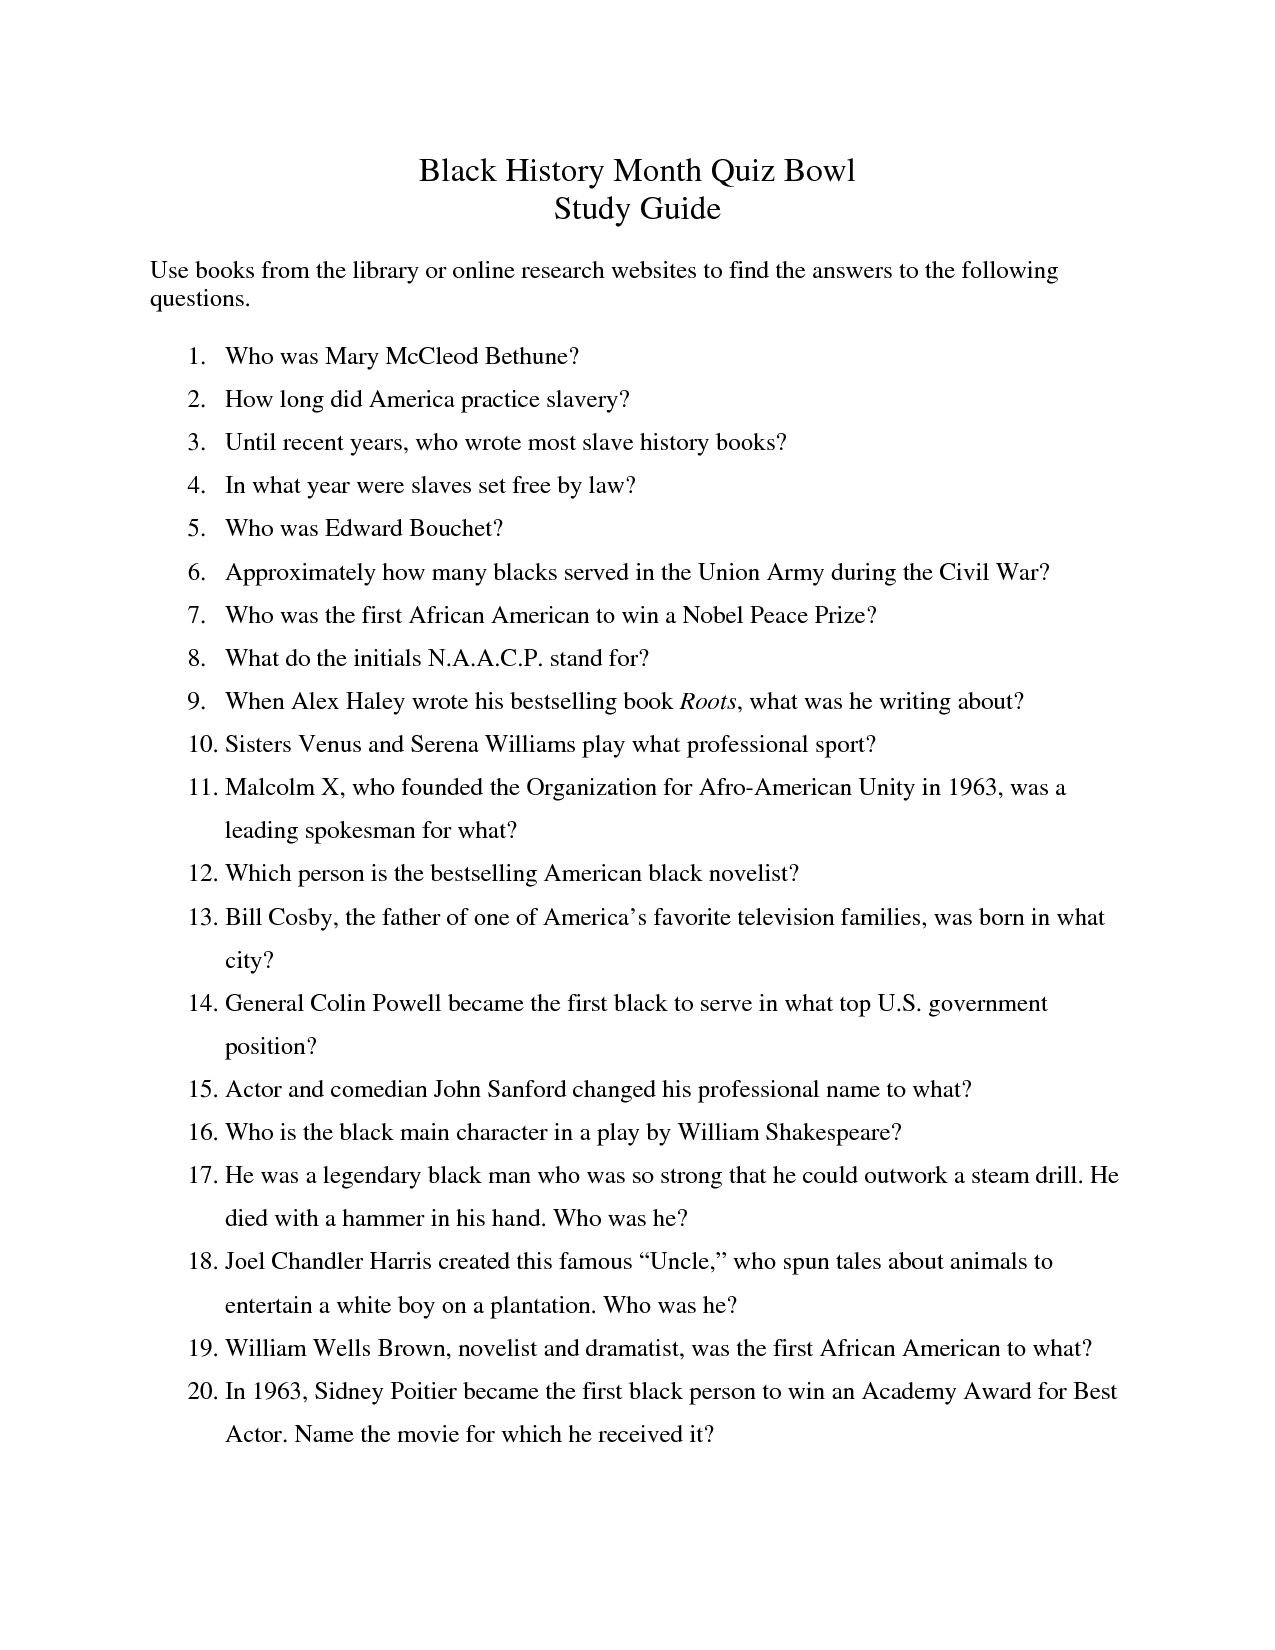 Black History Month Questions and Answers Image